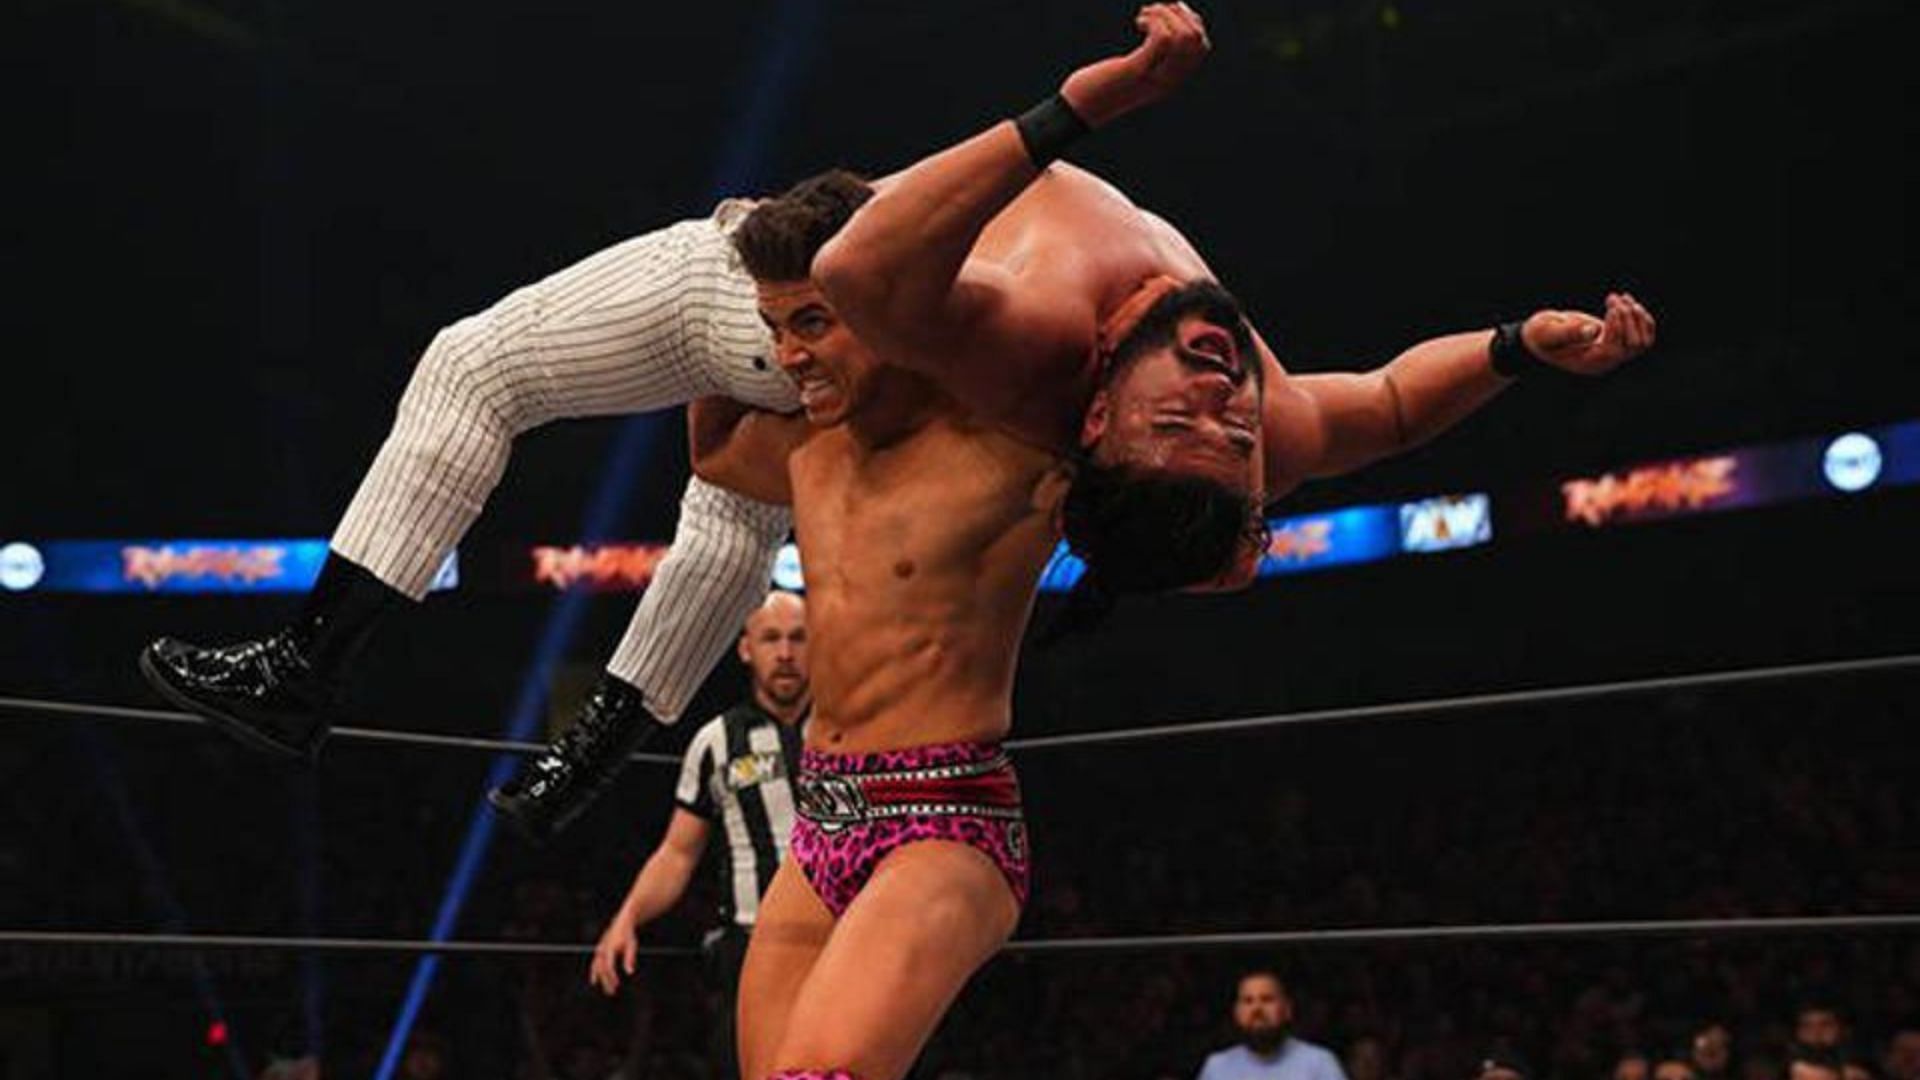 Sammy Guevara and Andrade El Idolo have previously faced each other in AEW